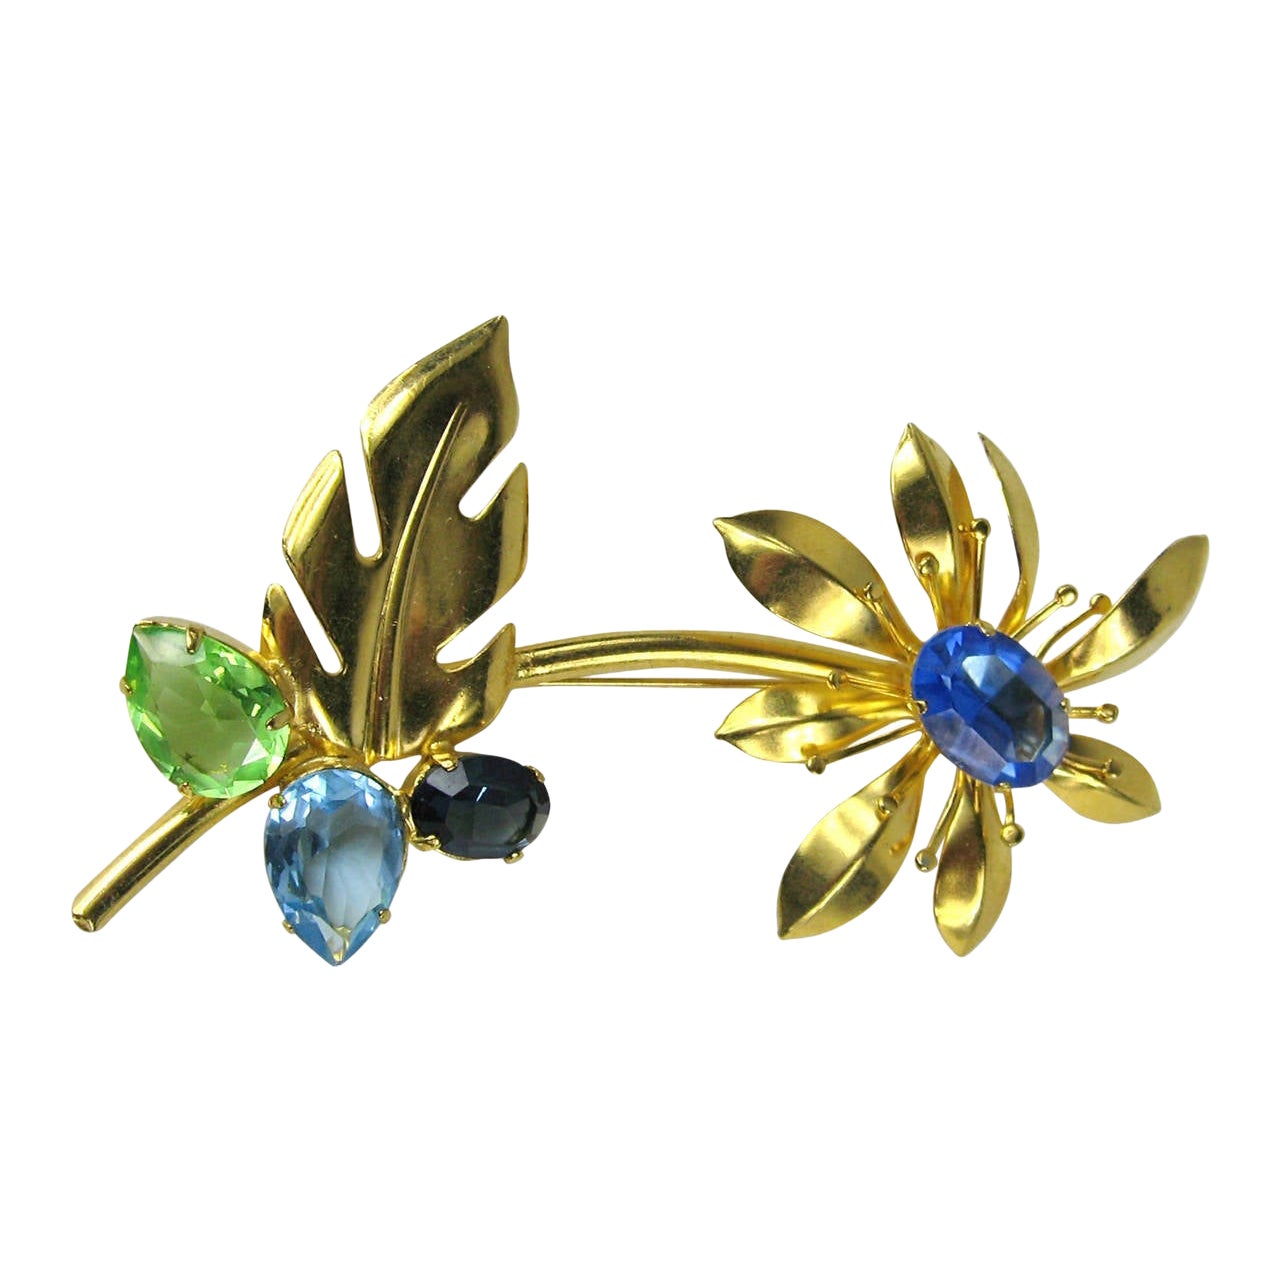 Philippe Ferrandis Gilt Brooch Floral Gold 1990s